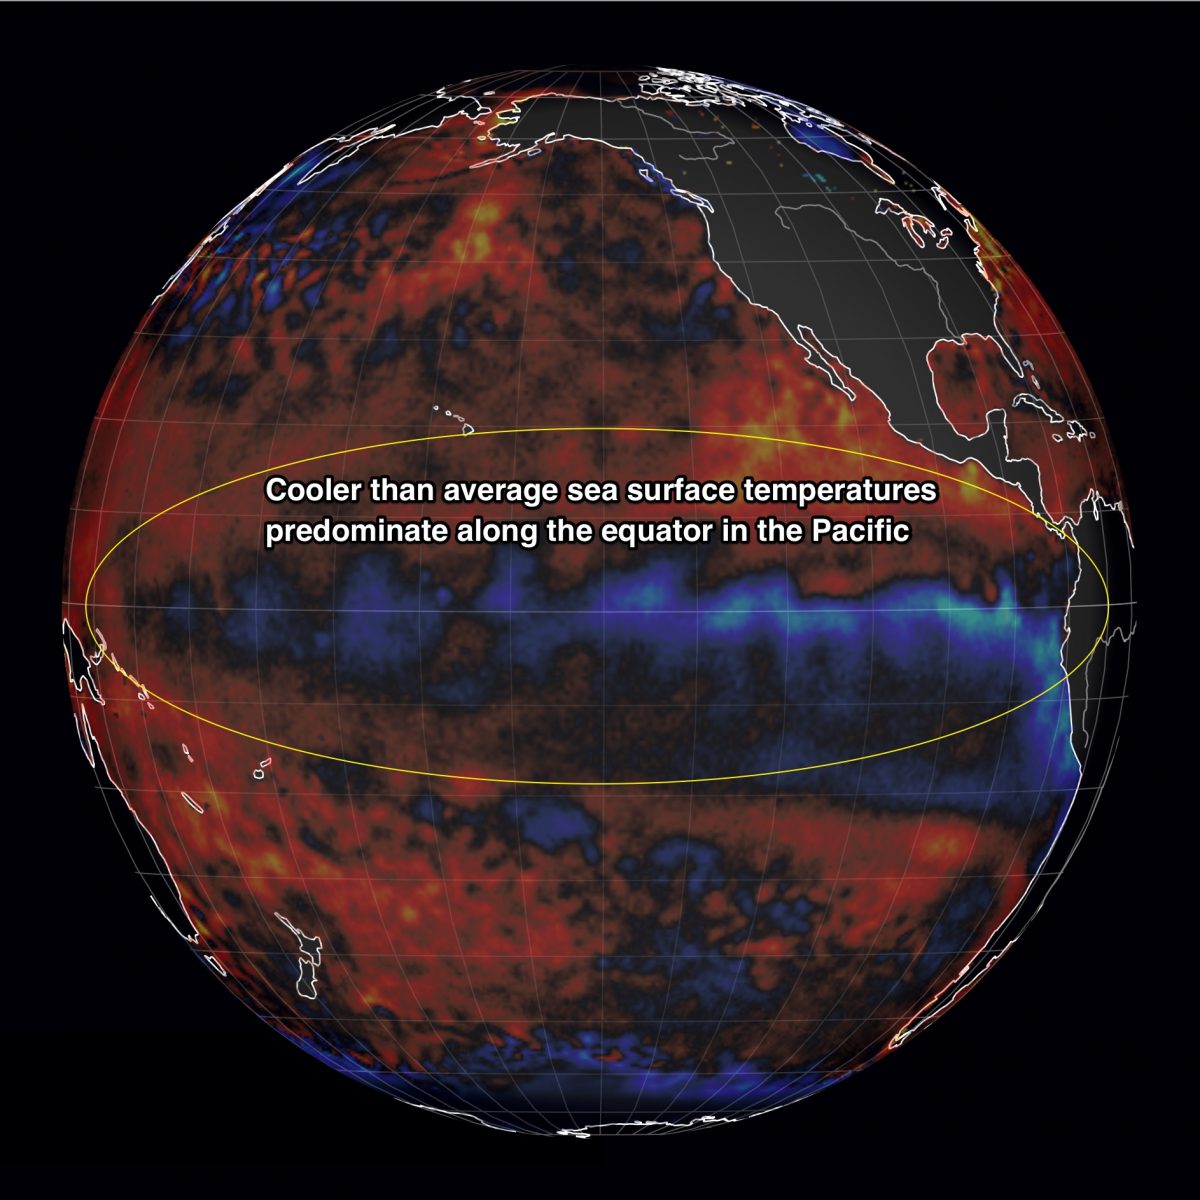 She's back! As a giant blob of cold water arises from the depths, La Niña takes over the equatorial Pacific